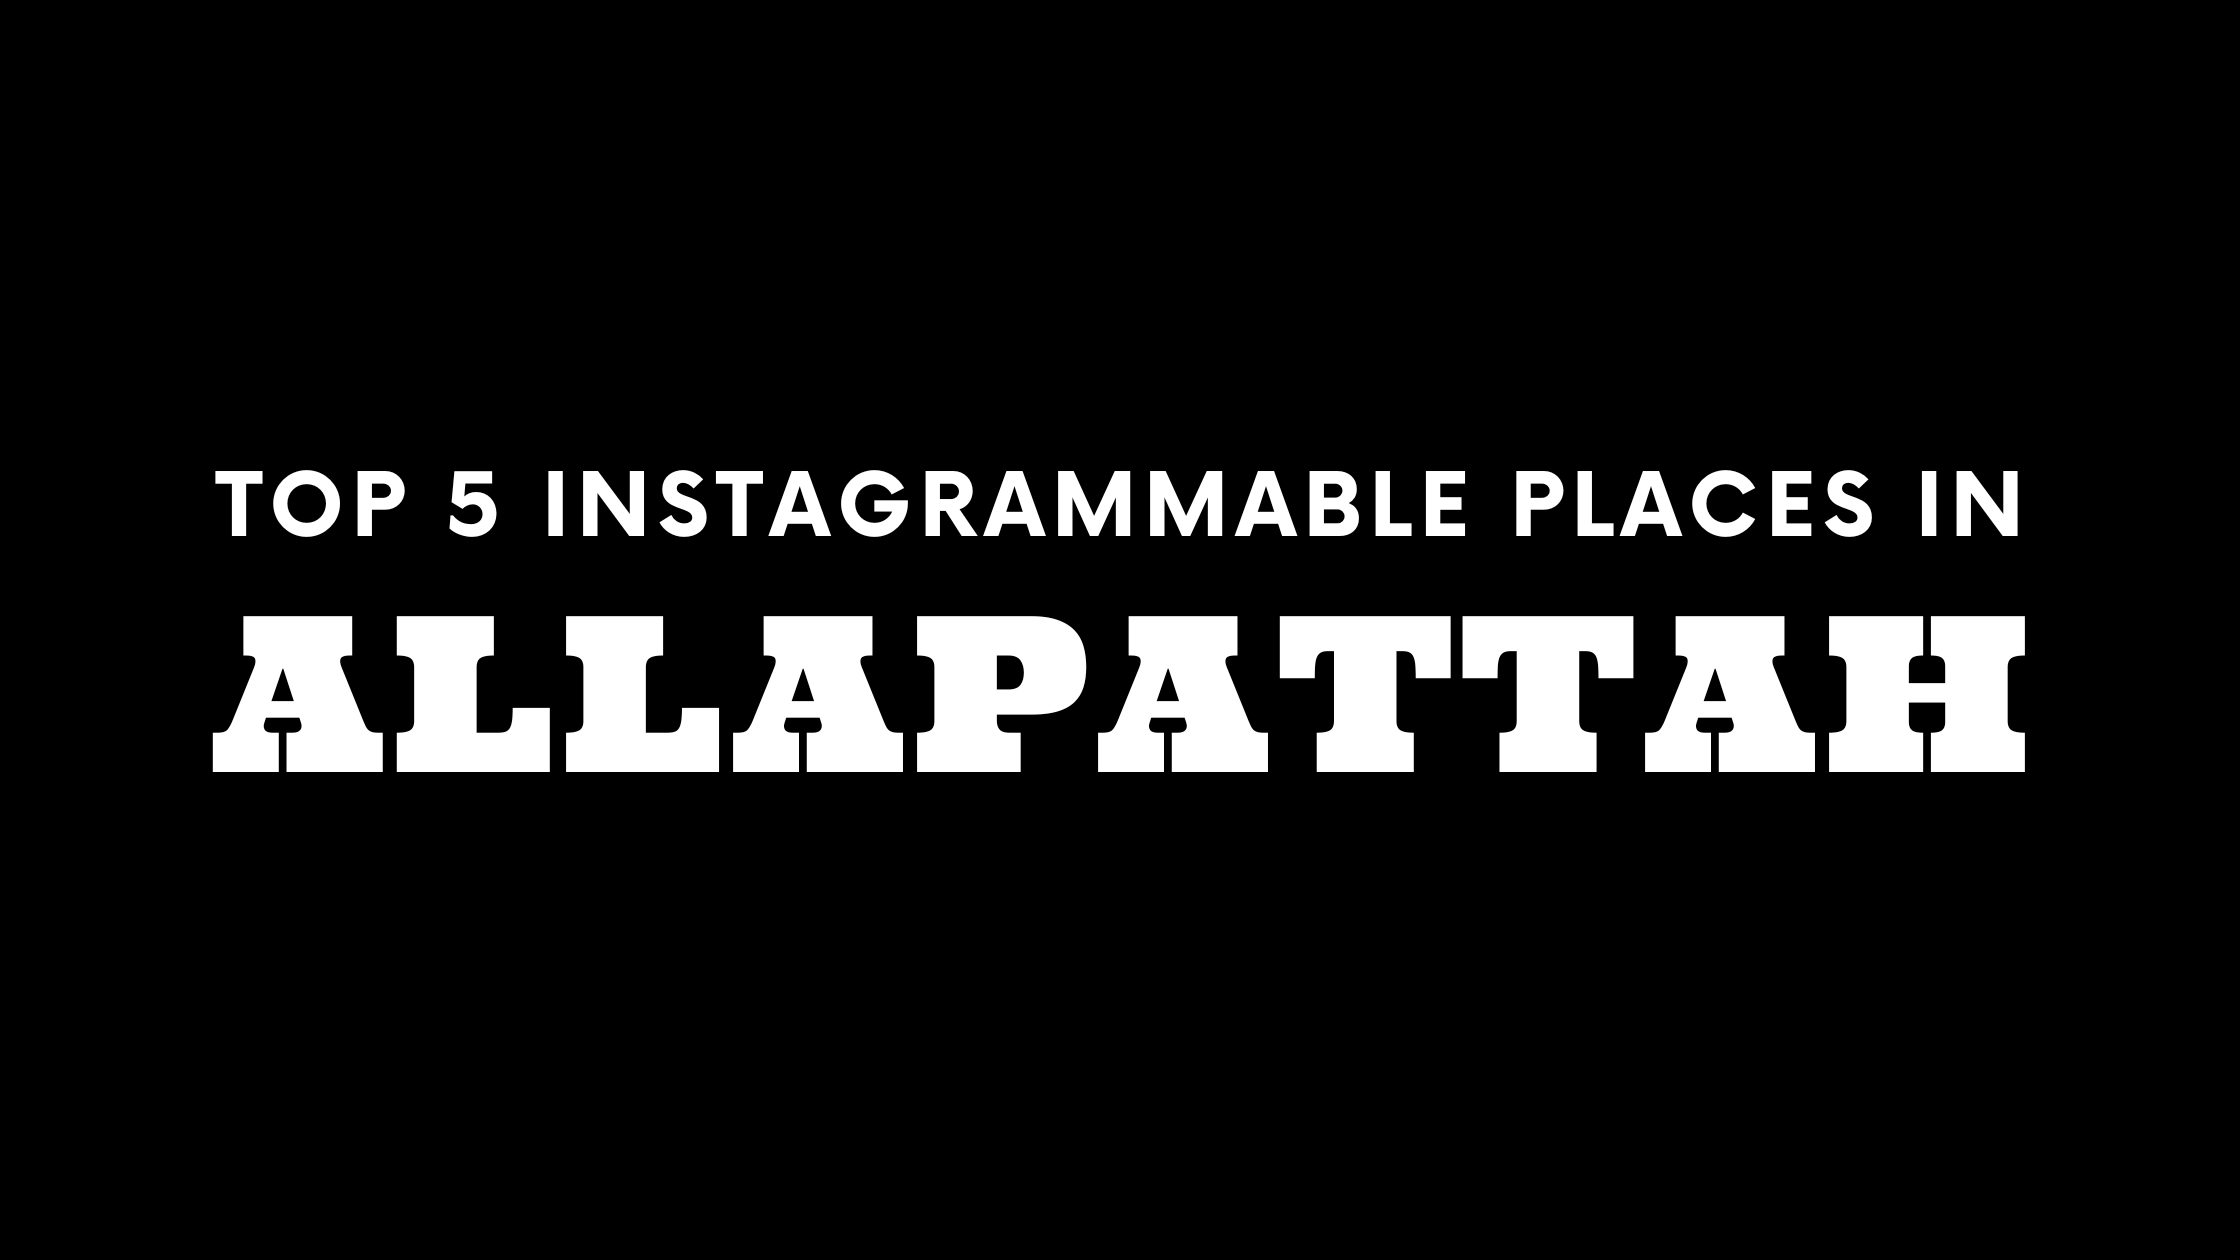 Top 5 Instagrammable Places in Allapattah